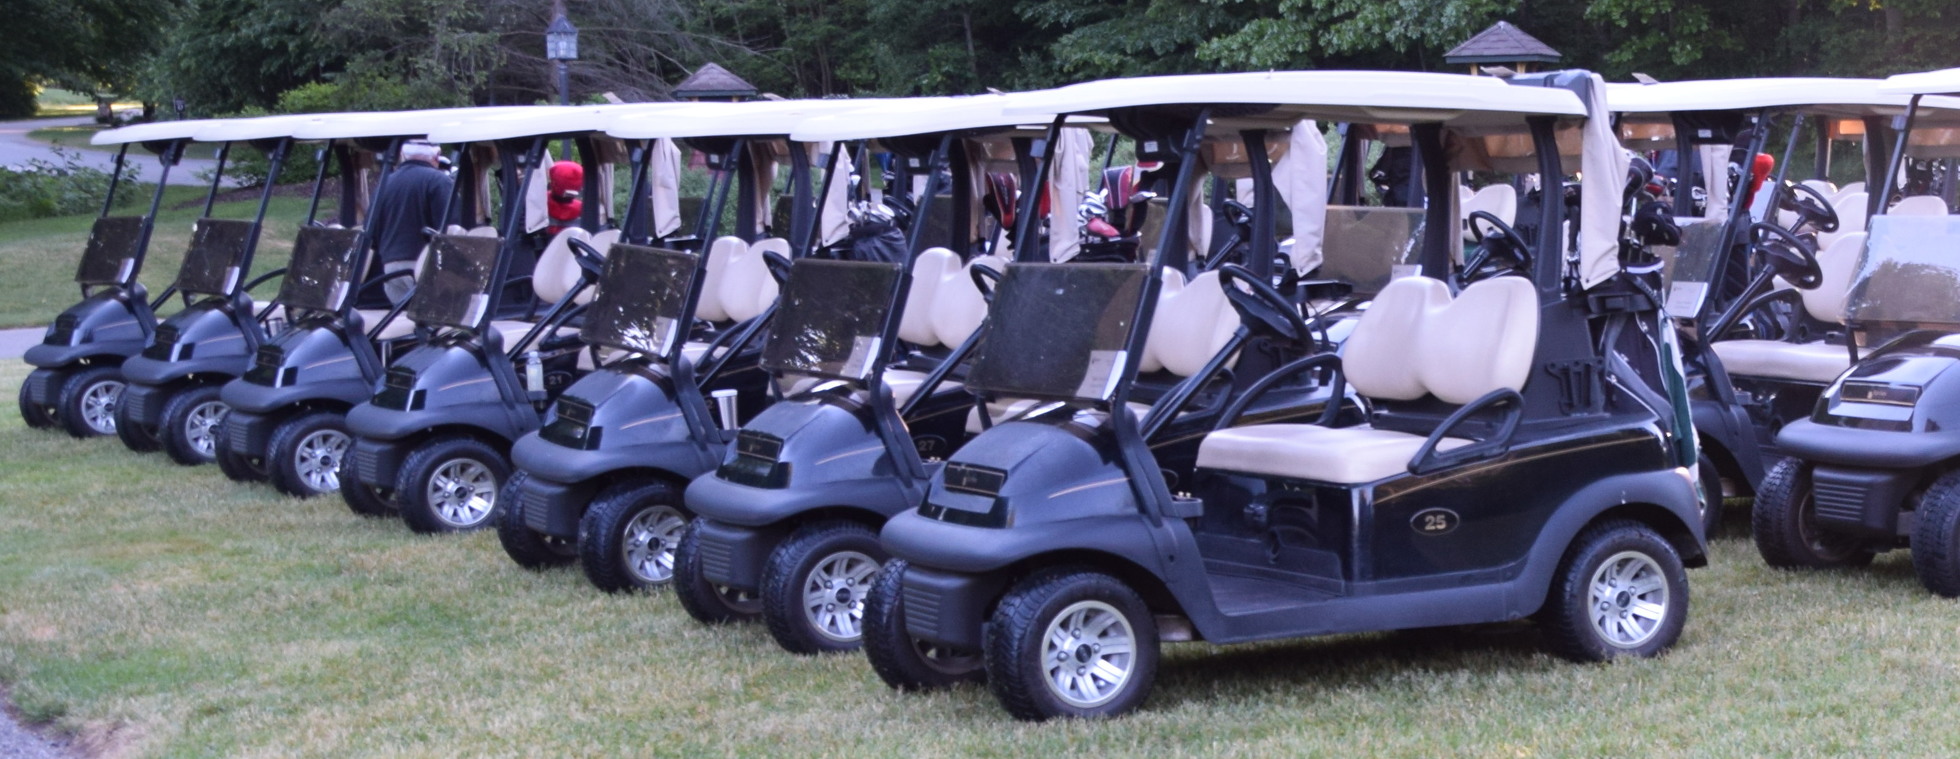 Annual Golf Outing - Holland Rescue Mission